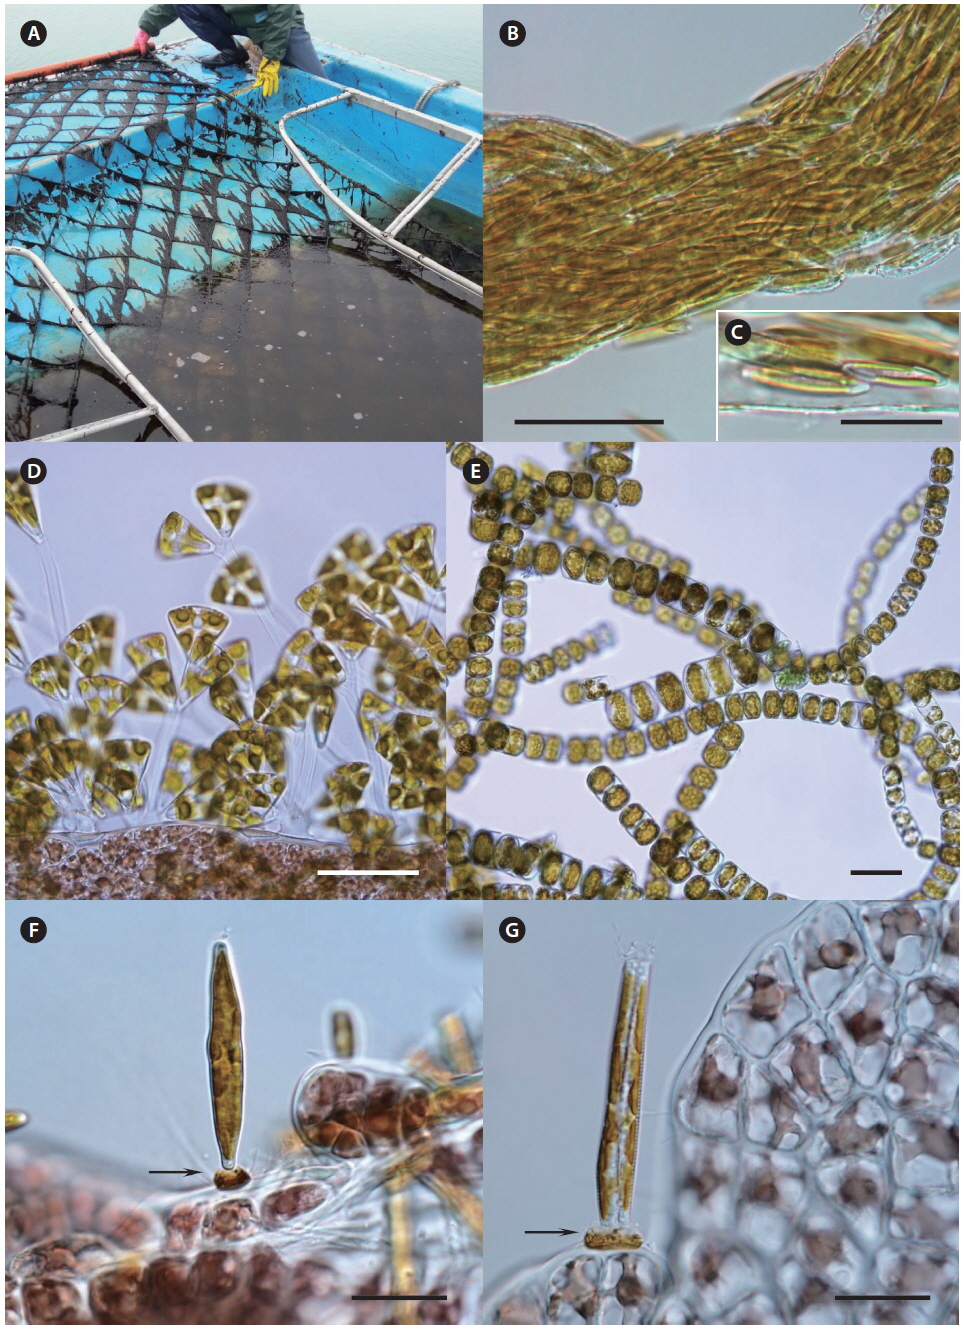 “Diatom felt” in commercially cultivated Pyropia in Korea and disease-producing organisms. (A) Cultivation net with Pyropia lifted onto the boat. The bottom of the boat is filled with brown-colored opaque seawater, which contains diatom cells detached from the net. (B) Long mucilaginous tubes filled with Navicula sp. cells. (C) Enlarged image of Navicula sp. cells inside the tube. (D) Pennate diatoms Licmophora flabellata attached to the surface of the host by long mucilaginous stalks. (E) Long chains of centric diatoms Melosira moniliformis. (F & G) Fragellaria sp. in valve (F) and lateral (G) views. Brown adherent material at the foot pole of diatom cells is indicated with arrows. Scale bars represent: B, D & E, 50 μm; C, F, & G, 20 μm.